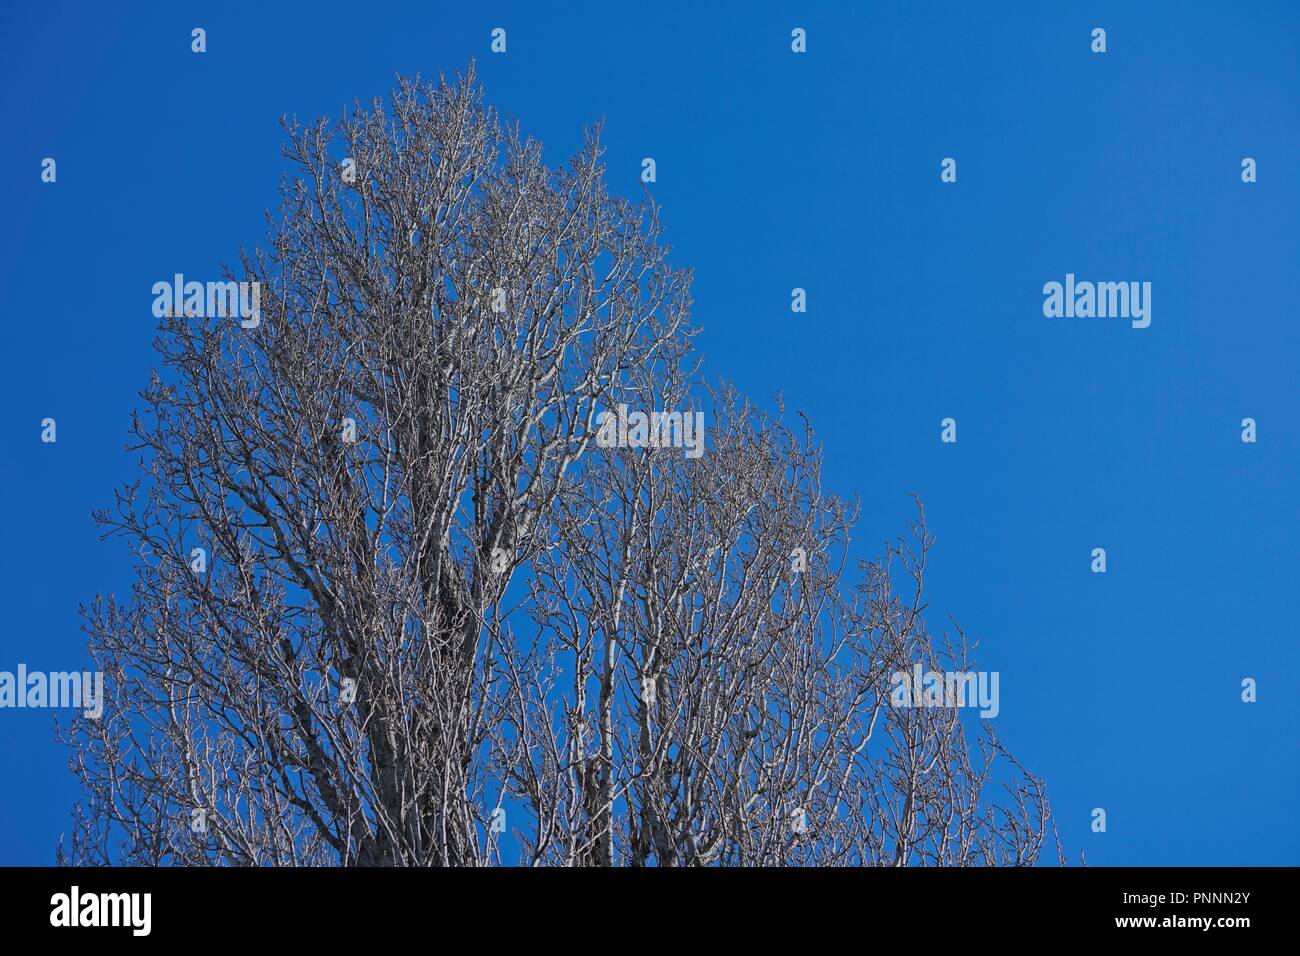 Looking up into the bare Winter canopy of a mature Poplar tree, with clear blue sky surrounding. Stock Photo